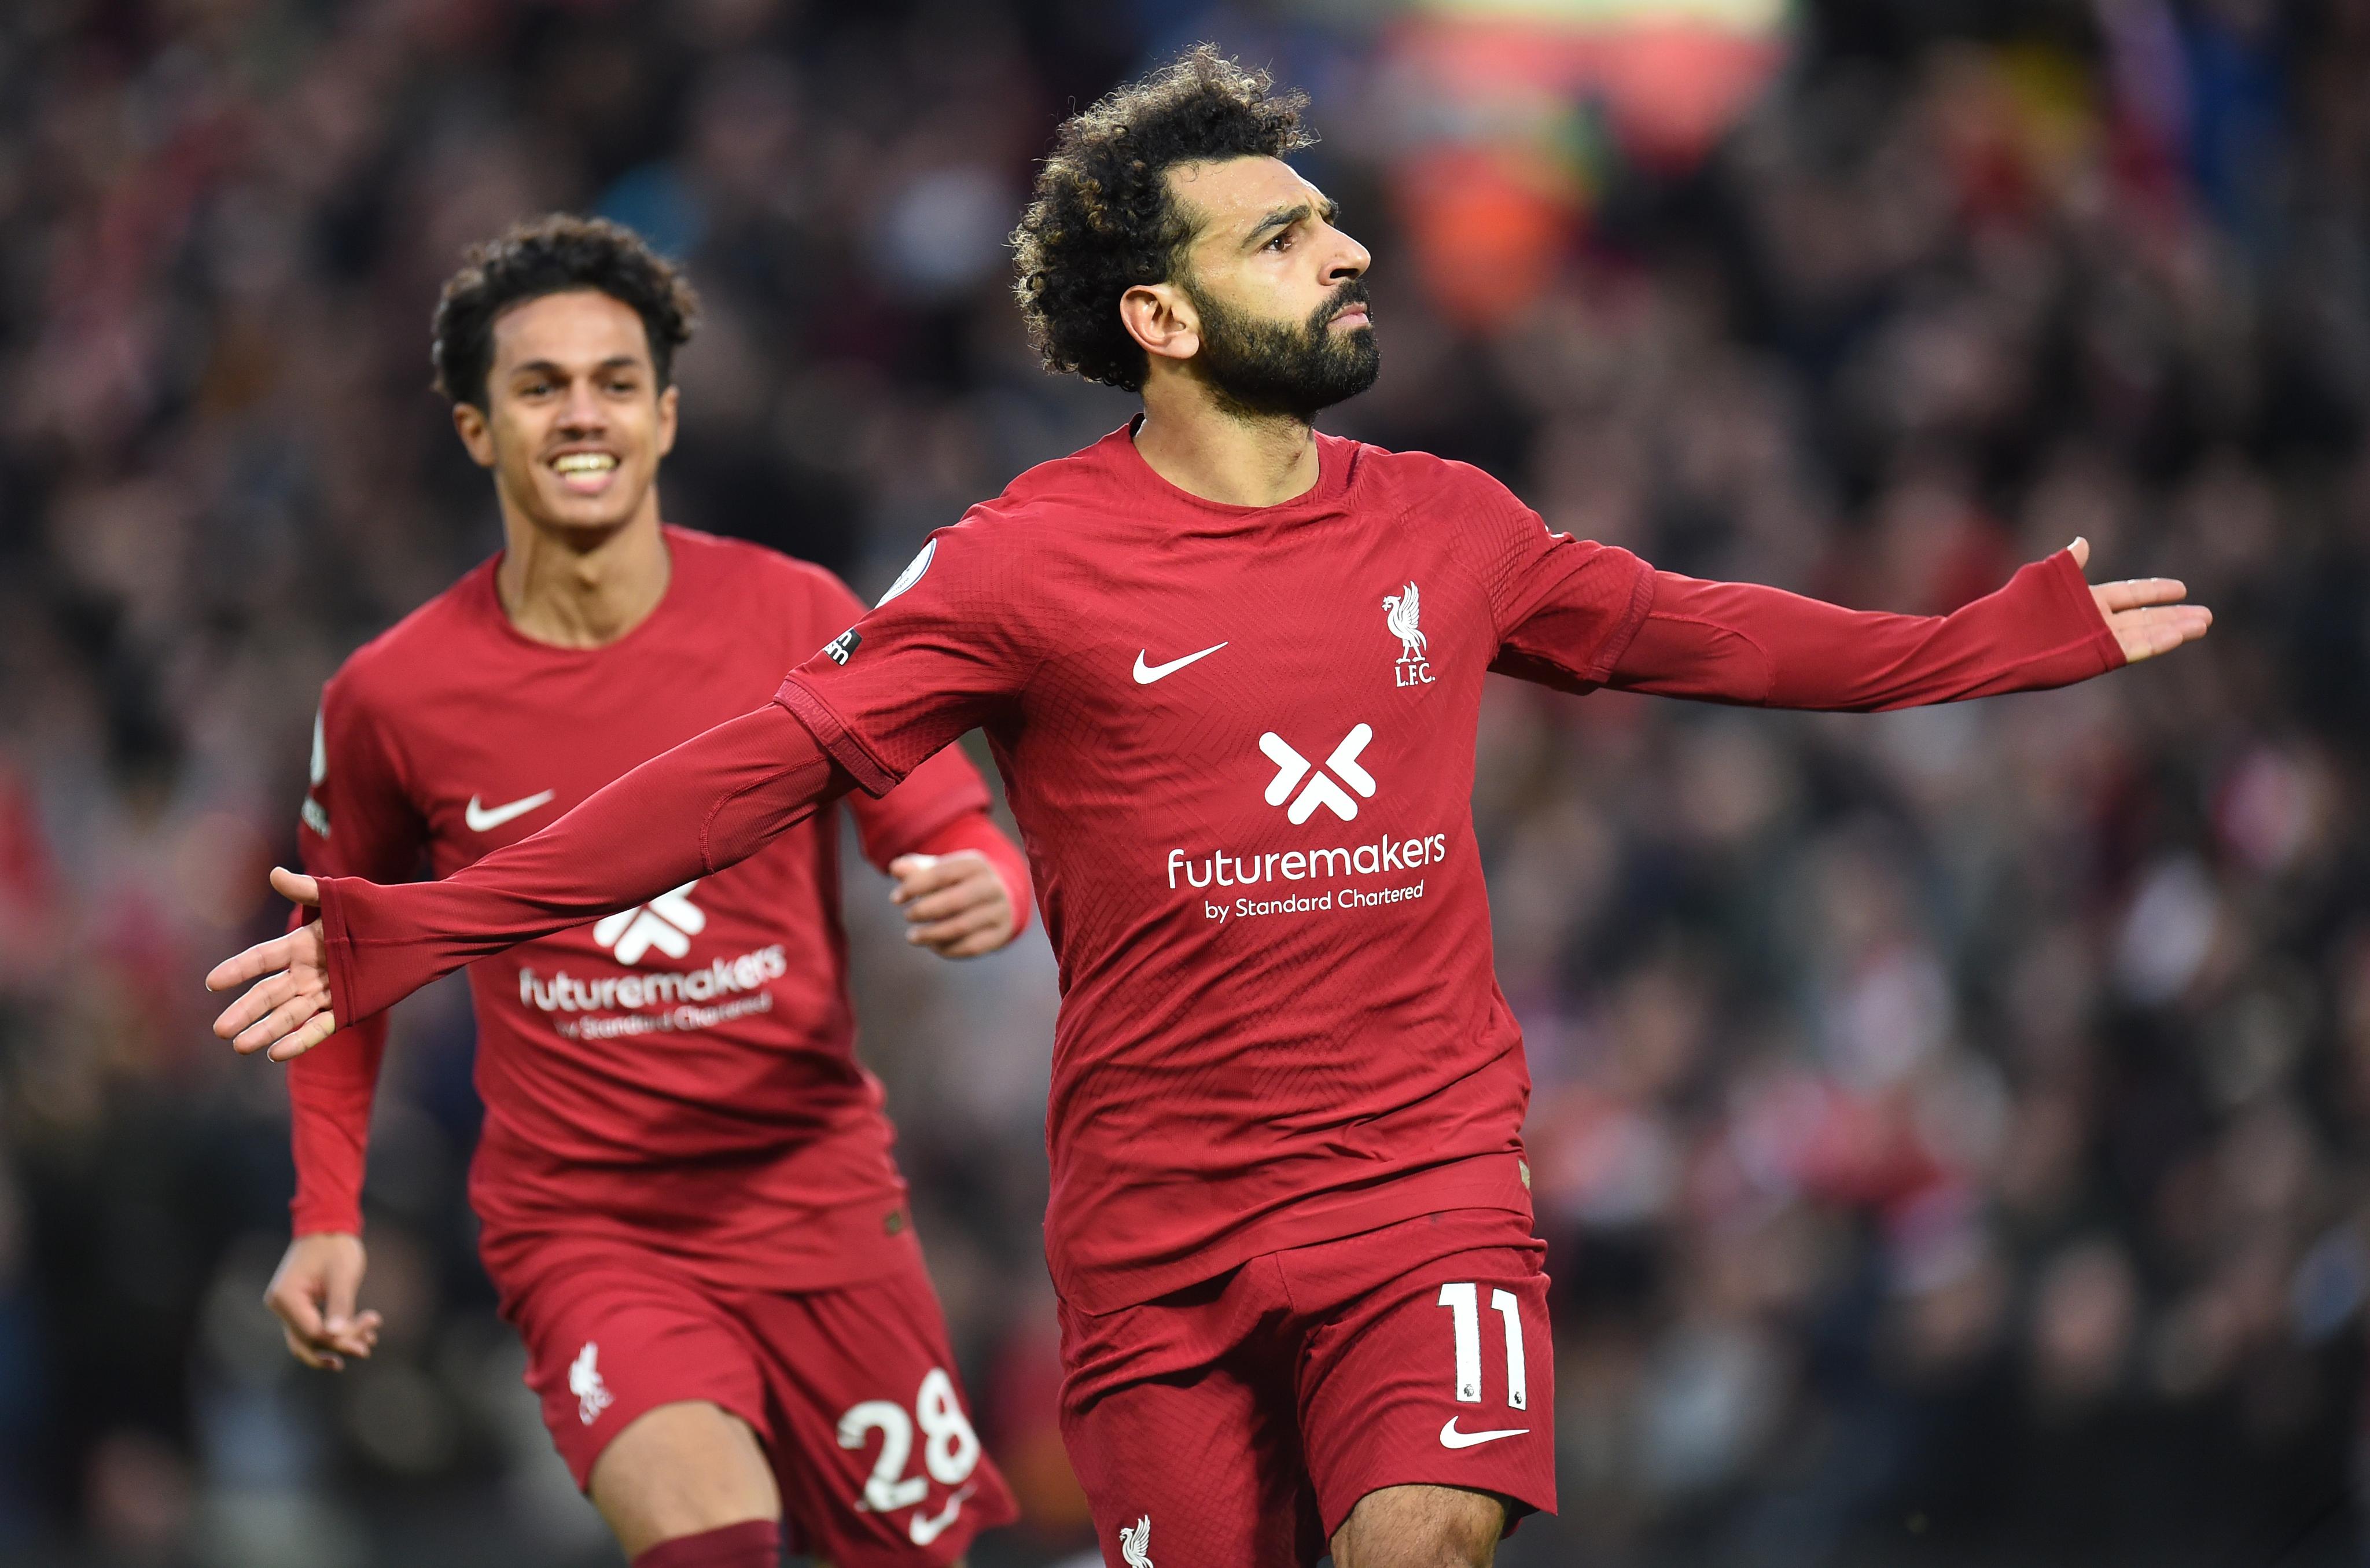 Ajax vs Liverpool LIVE - Liverpool travel to Amsterdam to BATTLE Ajax in MUST WIN clash - - Check team news, Injuries & Suspensions, Live Telecast, Starting XI, Predictions - Follow LIVE